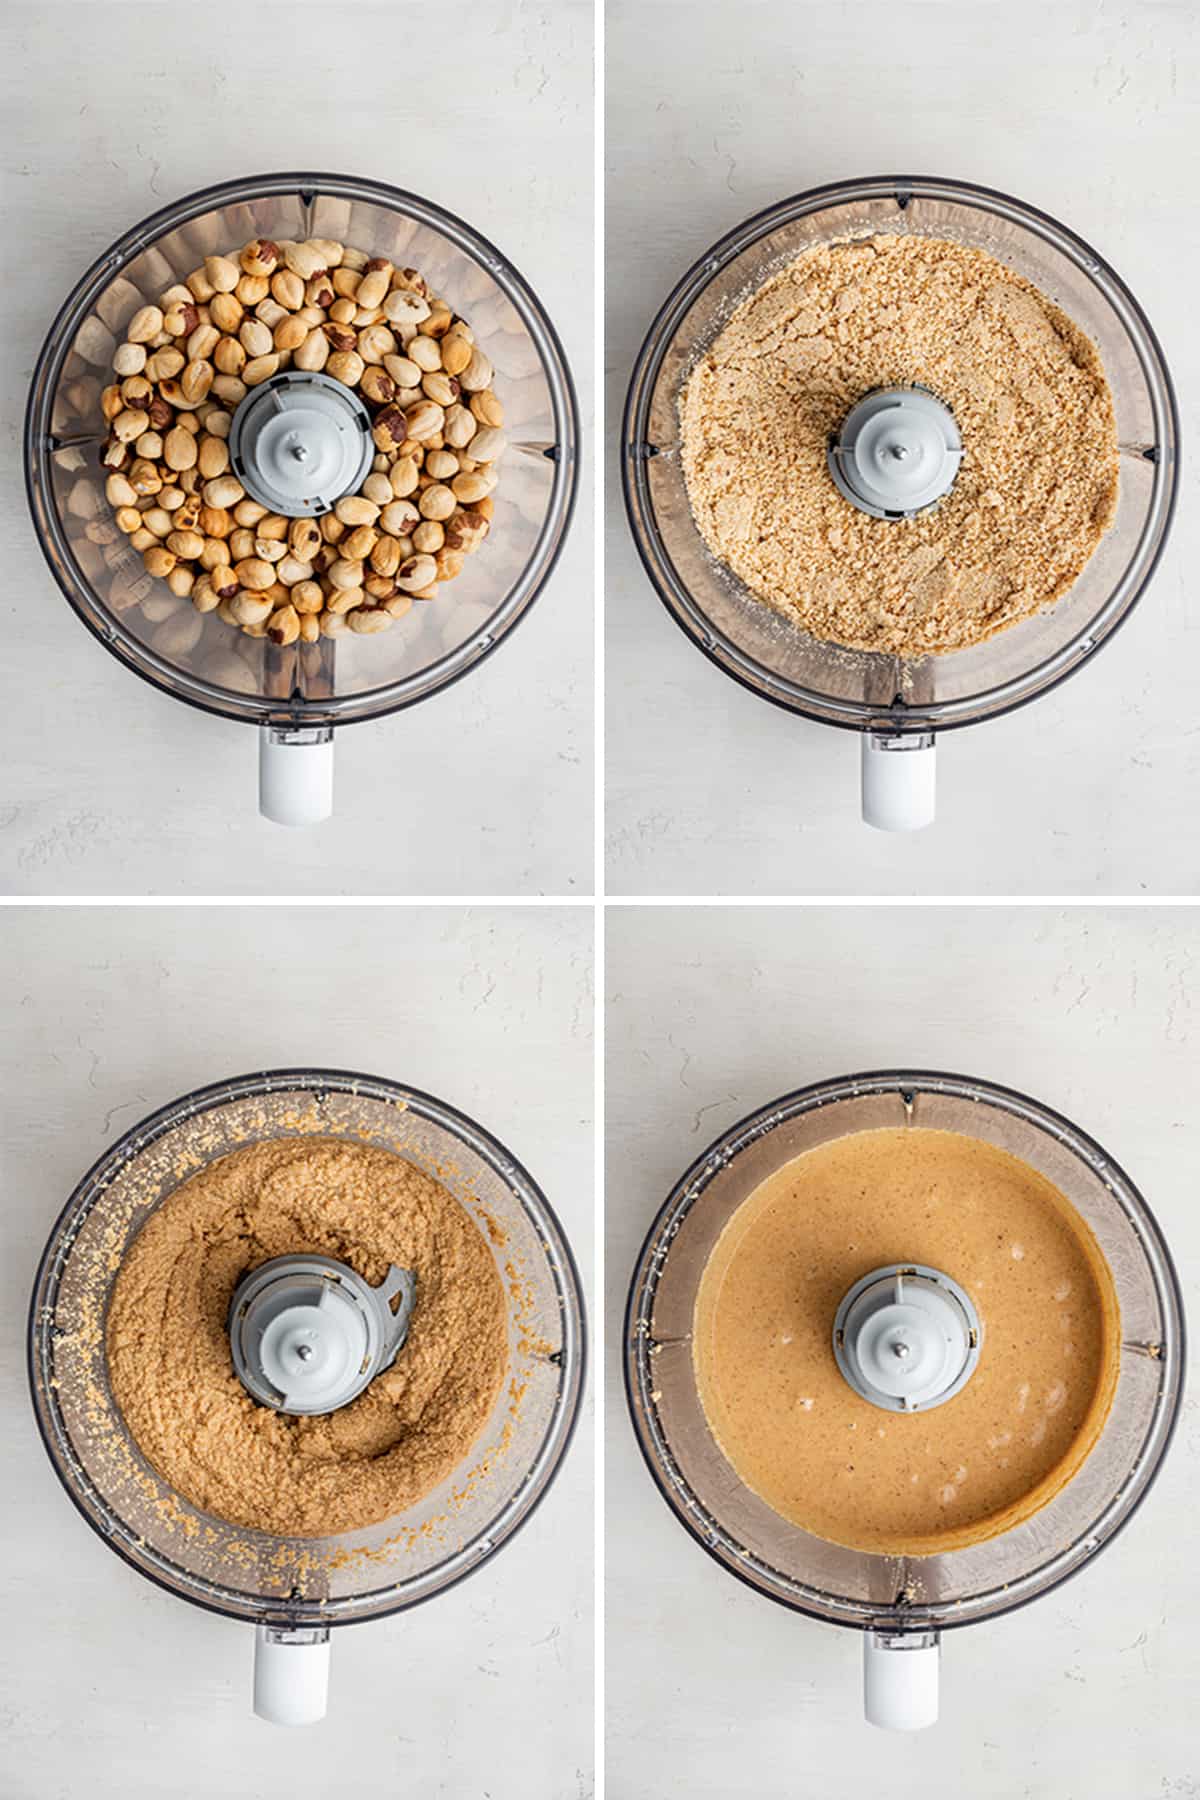 Four pictures: a food processor with whole hazelnuts in; a food processor with the hazelnuts ground to a sand-like mixture; a food processor with hazelnuts processed down to a wet sand texture; and a food processor with hazelnut better in it